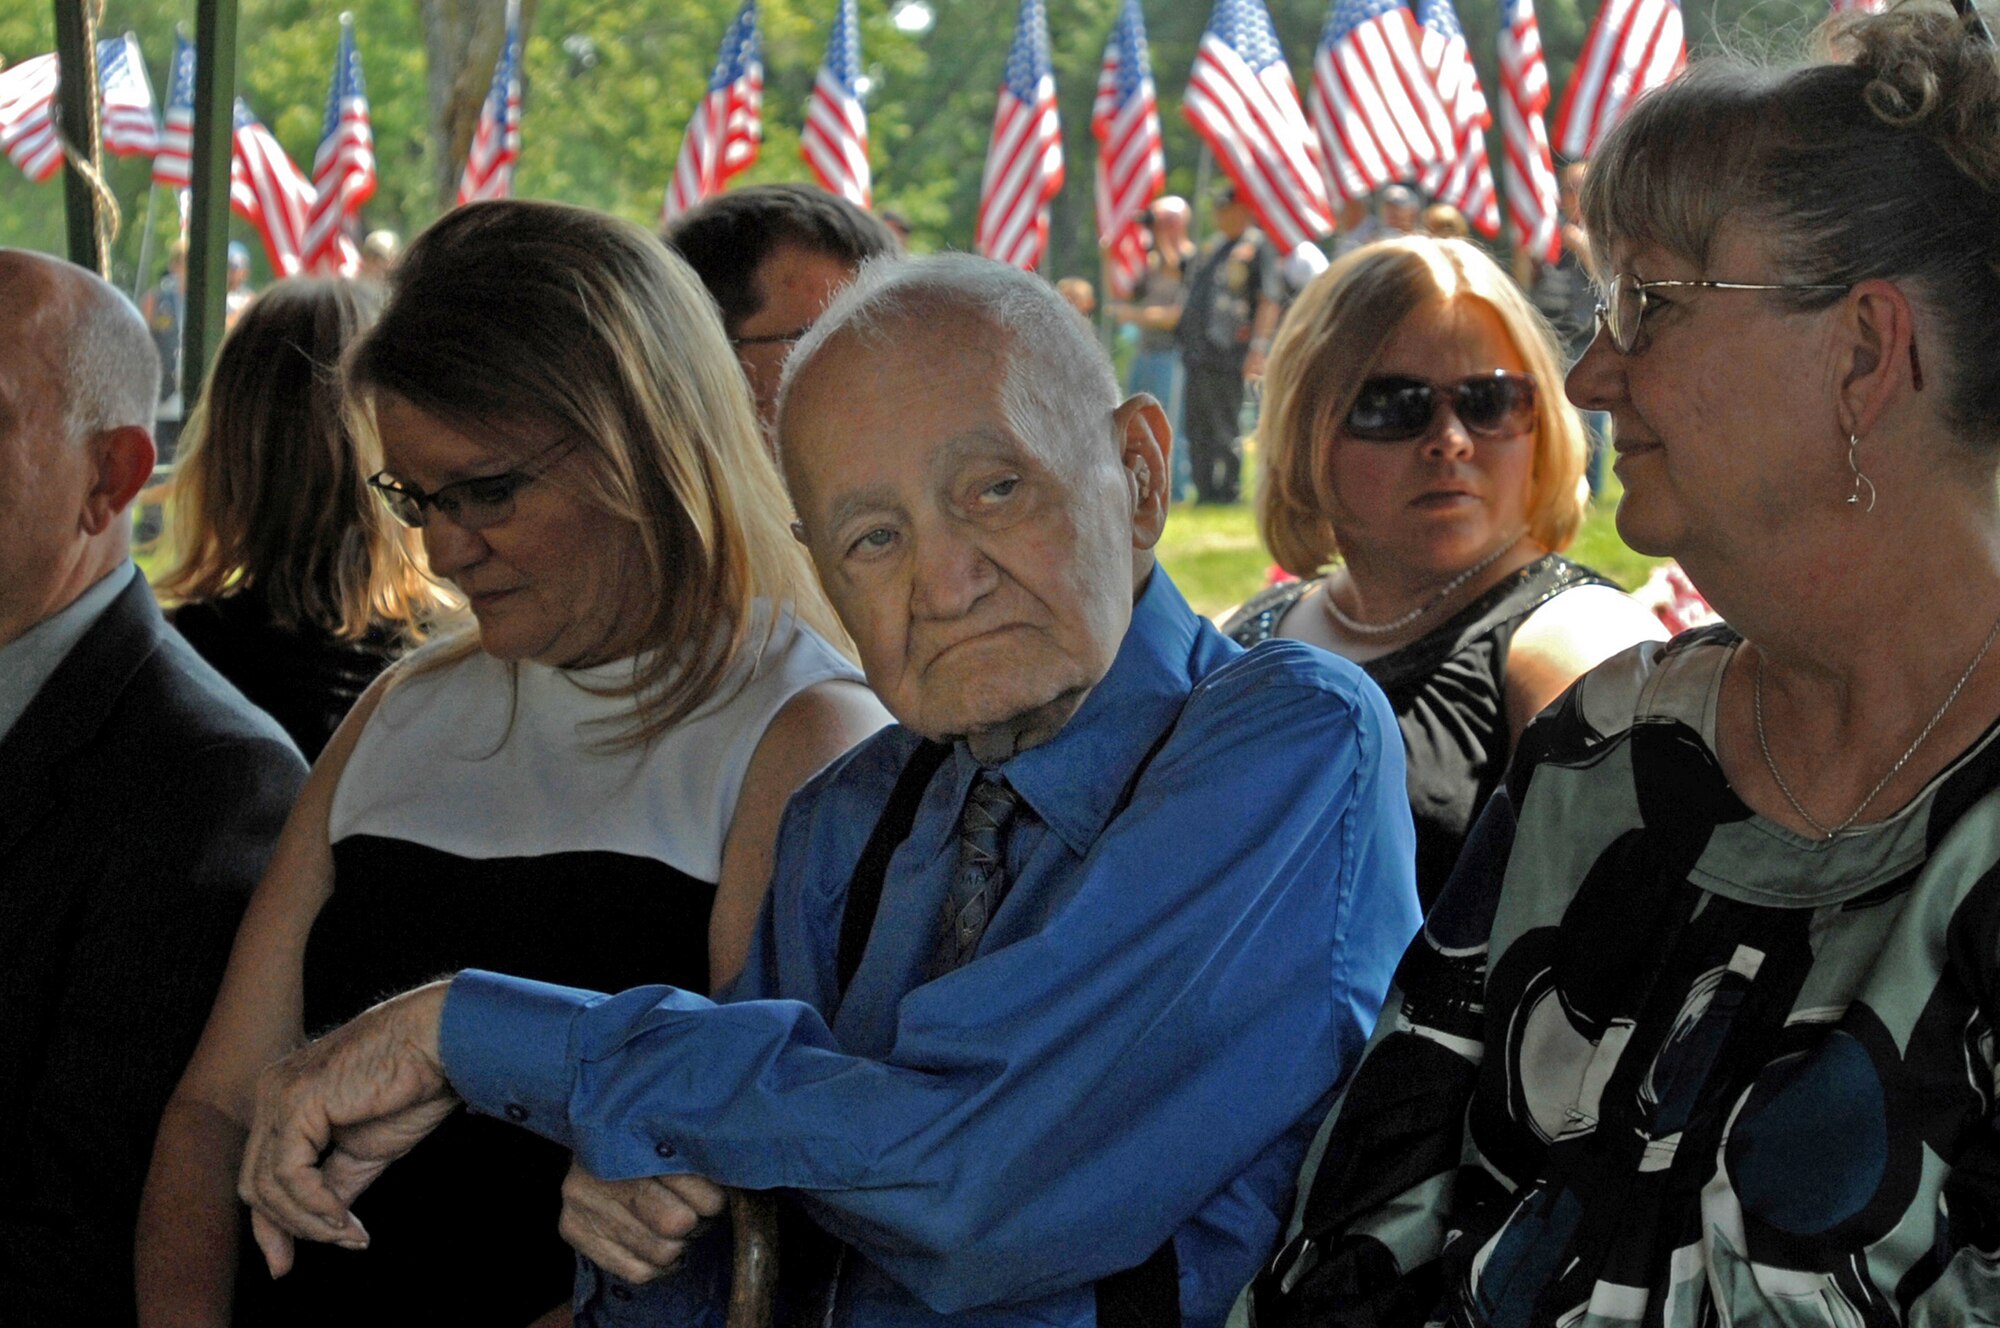 Kenneth Adam, father of Chief Master Sgt. Quincy Adam, waits for the burial portion of his son's funeral service to begin July 27 at Chapel Hill Memorial Cemetery in Kansas City, Kan. Chief Adam is a Vietnam War veteran who was missing in action for more than 40 years. Chief Adam's remains were discovered in Southeast Asia, and he was finally brought home to be laid to rest, giving his family closure in their lives. (U.S. Air Force photo/Senior Airman Kenny Holston)